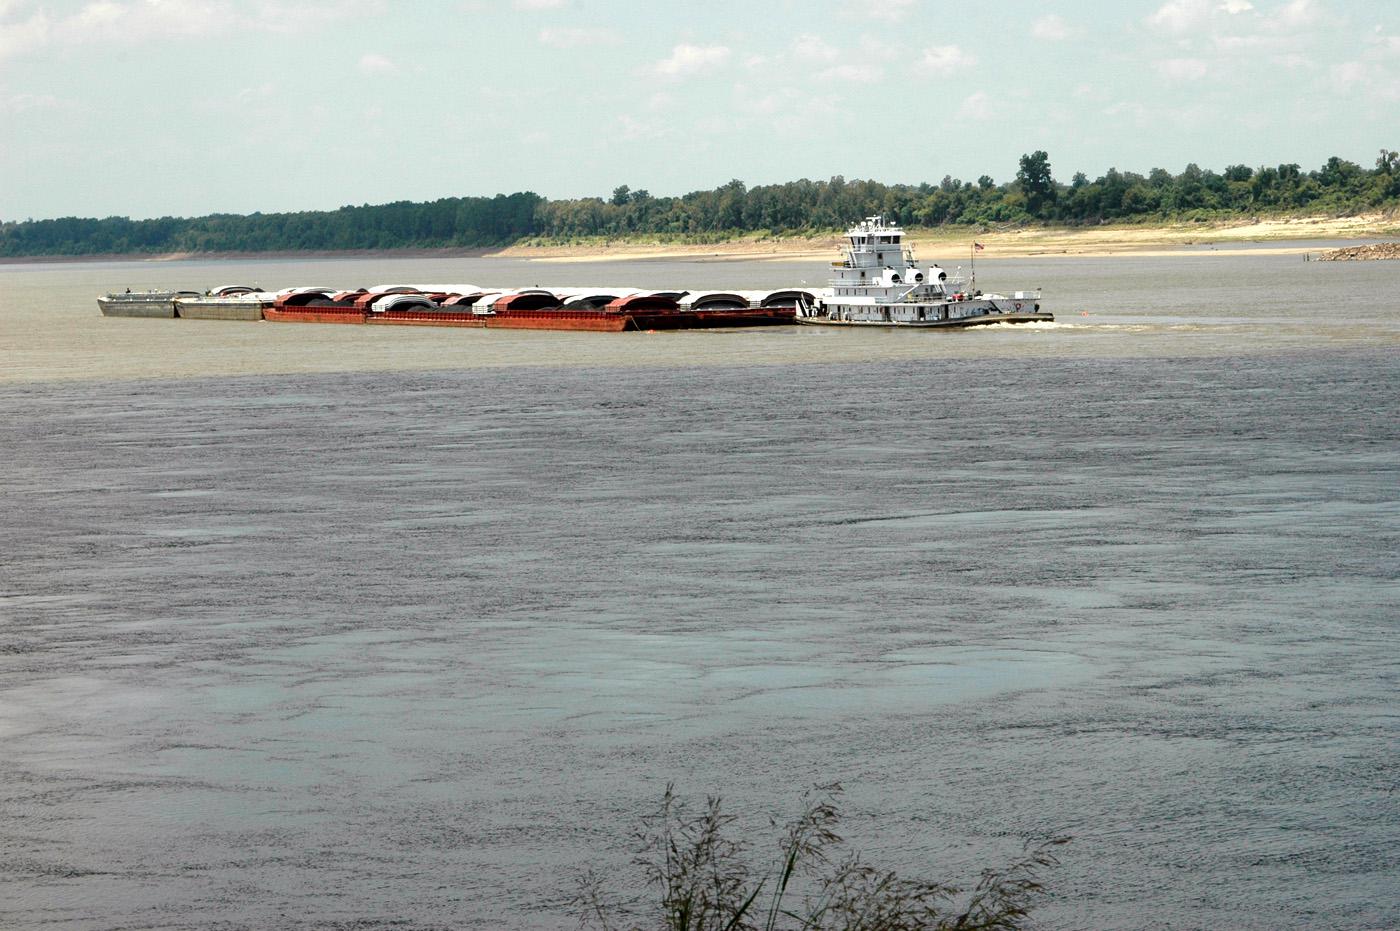 Mississippi farmers are counting on barges such as this one near the Port of Greenville on Wednesday, July 25, 2012, to continue accessing river ports to load and unload farm products. (Photo by MSU Delta Research and Extension Center/Rebekah Ray)